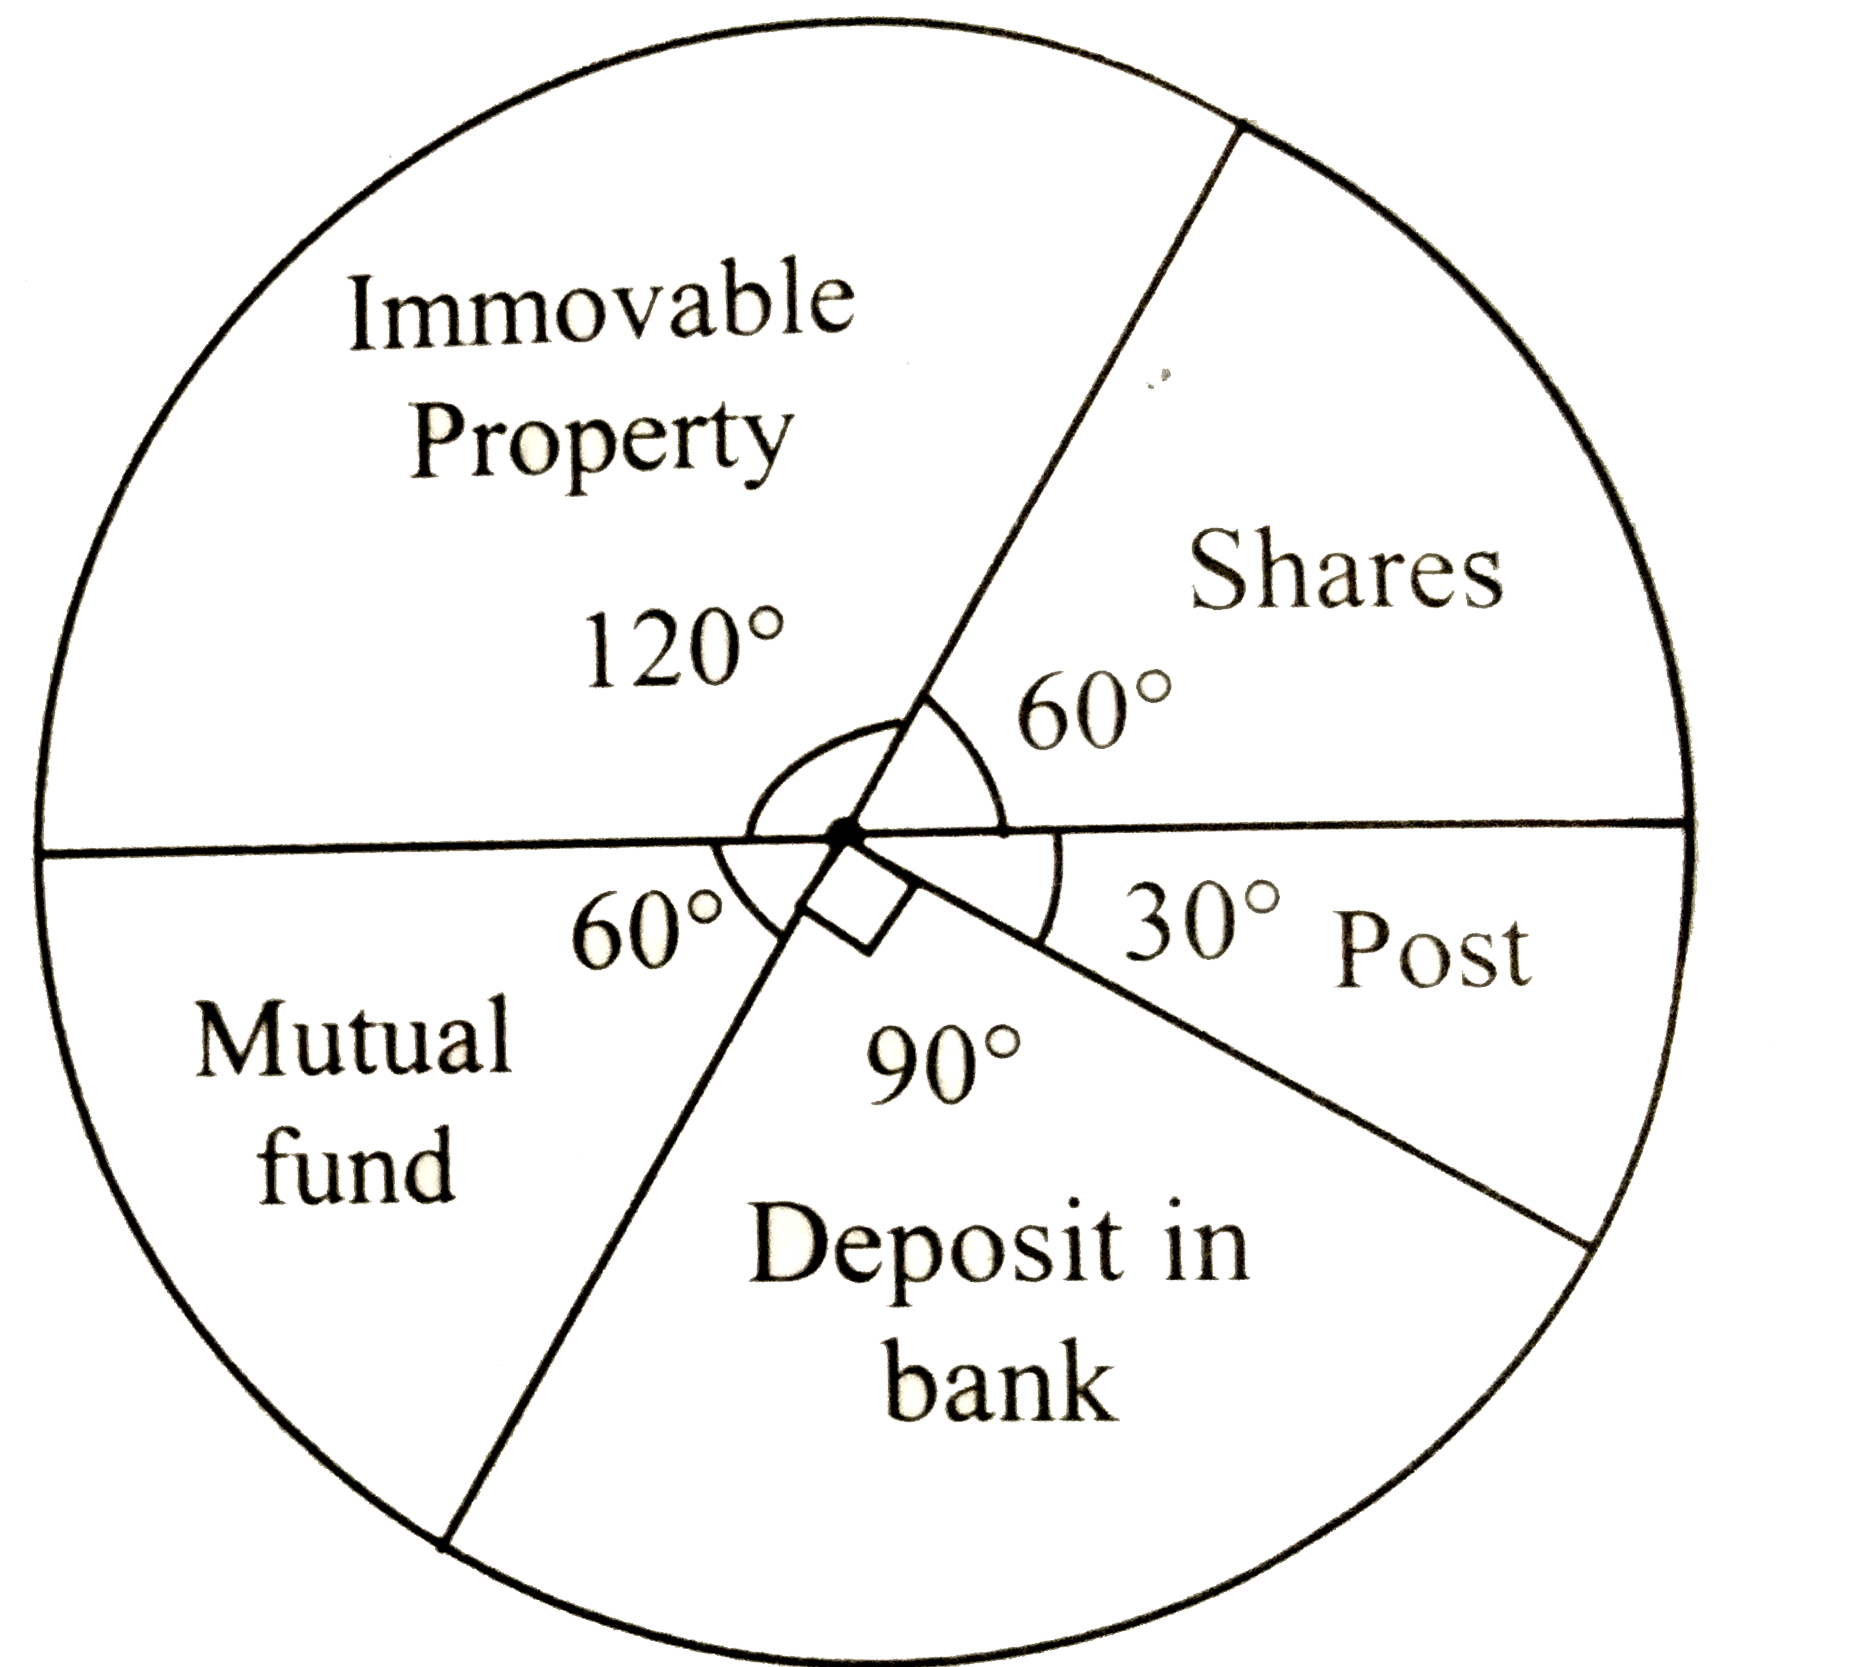 The annual investments of a family are shown in the given pie diagram. Answer the following questions based on it.   i. If the investment in shares is Rs2000, find the total investment.   ii. How much amount is deposited in bank?   iii. How much more money is invested in immovable property than in mutual fund?   iv. How much amount is invested in post?